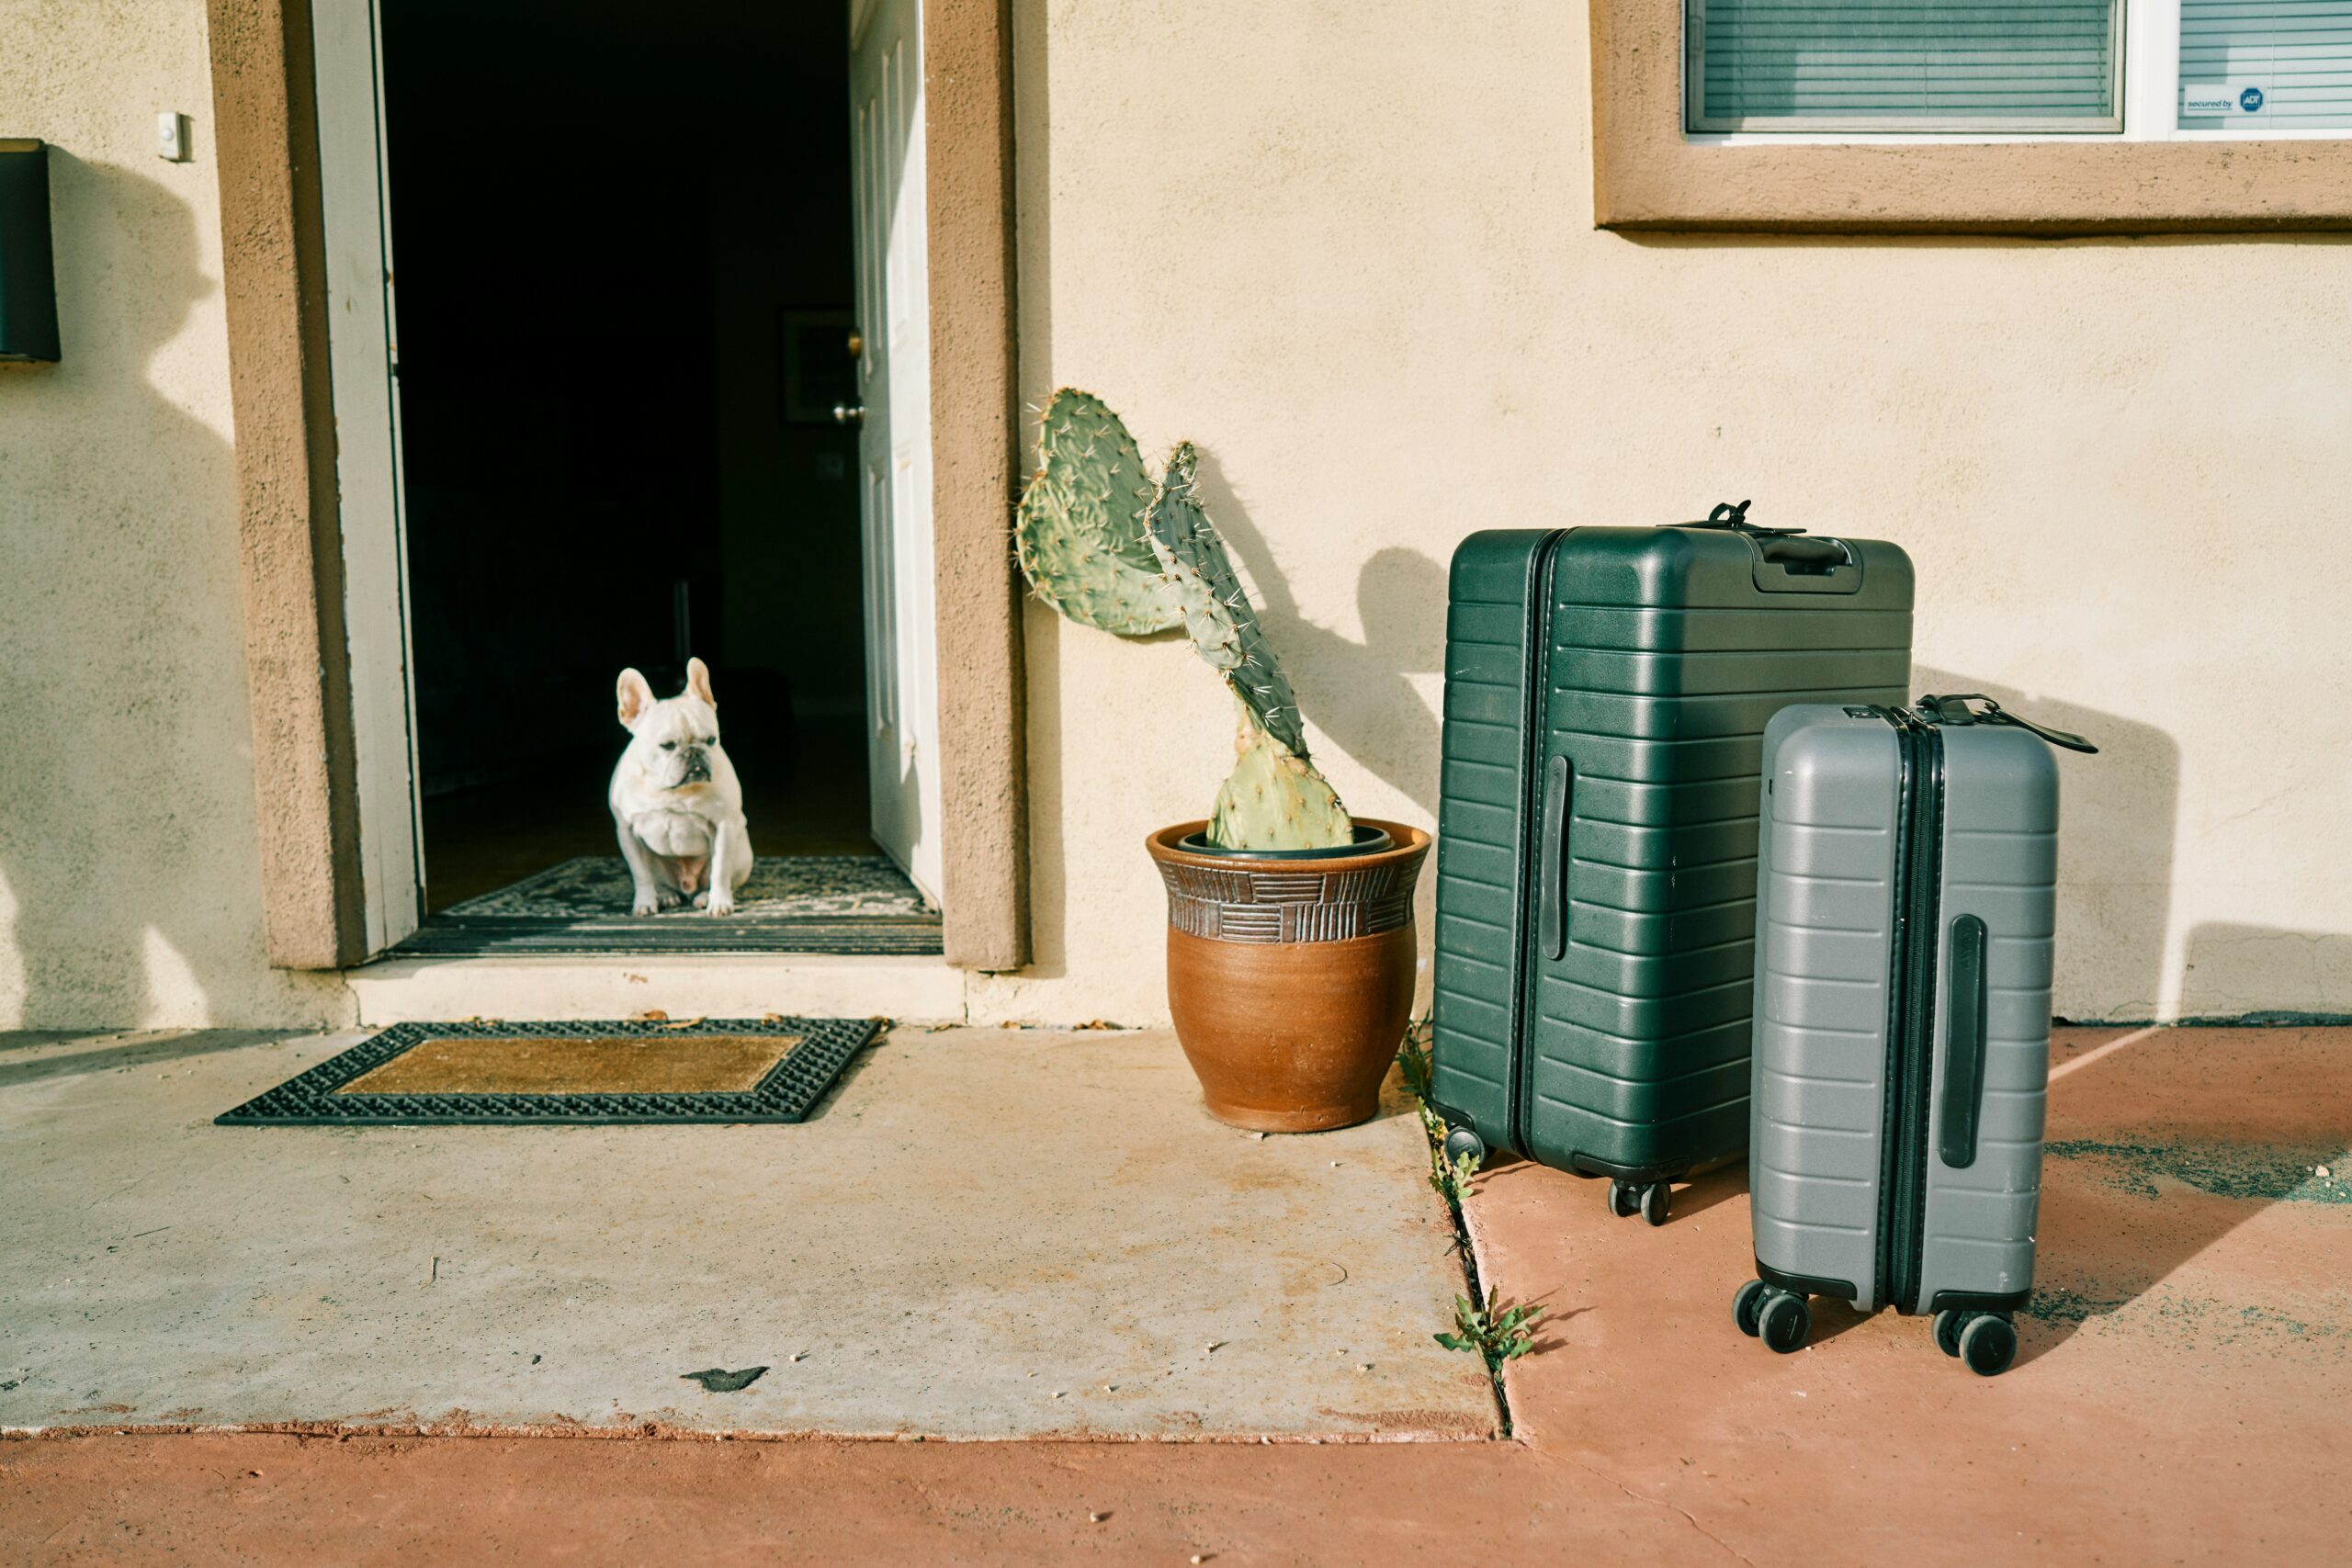 American Airlines Relaxes Policy on Traveling with Pets and Carry-On Bags